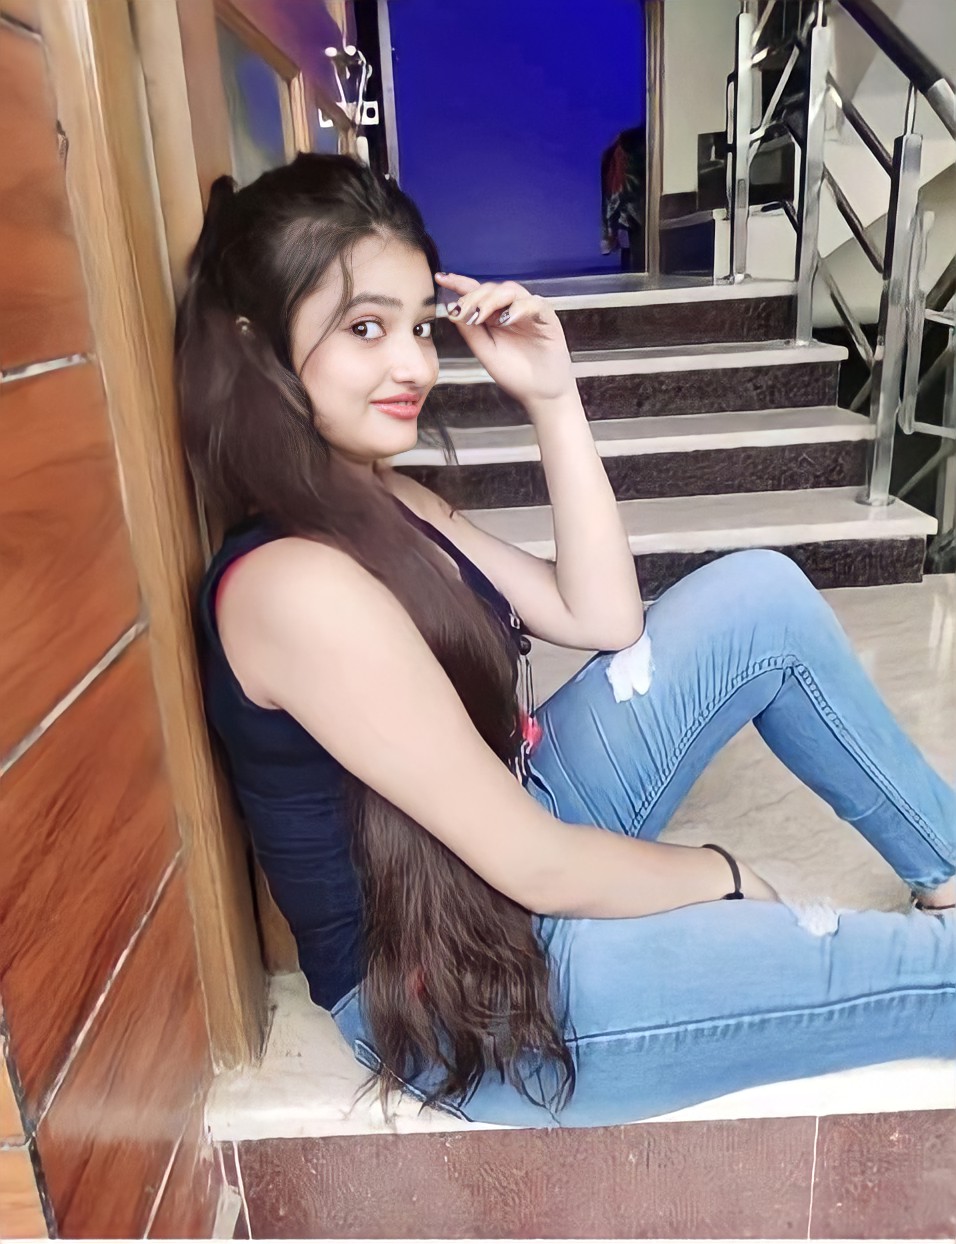 Pune high💯 profile best genuine call girl service college girl an